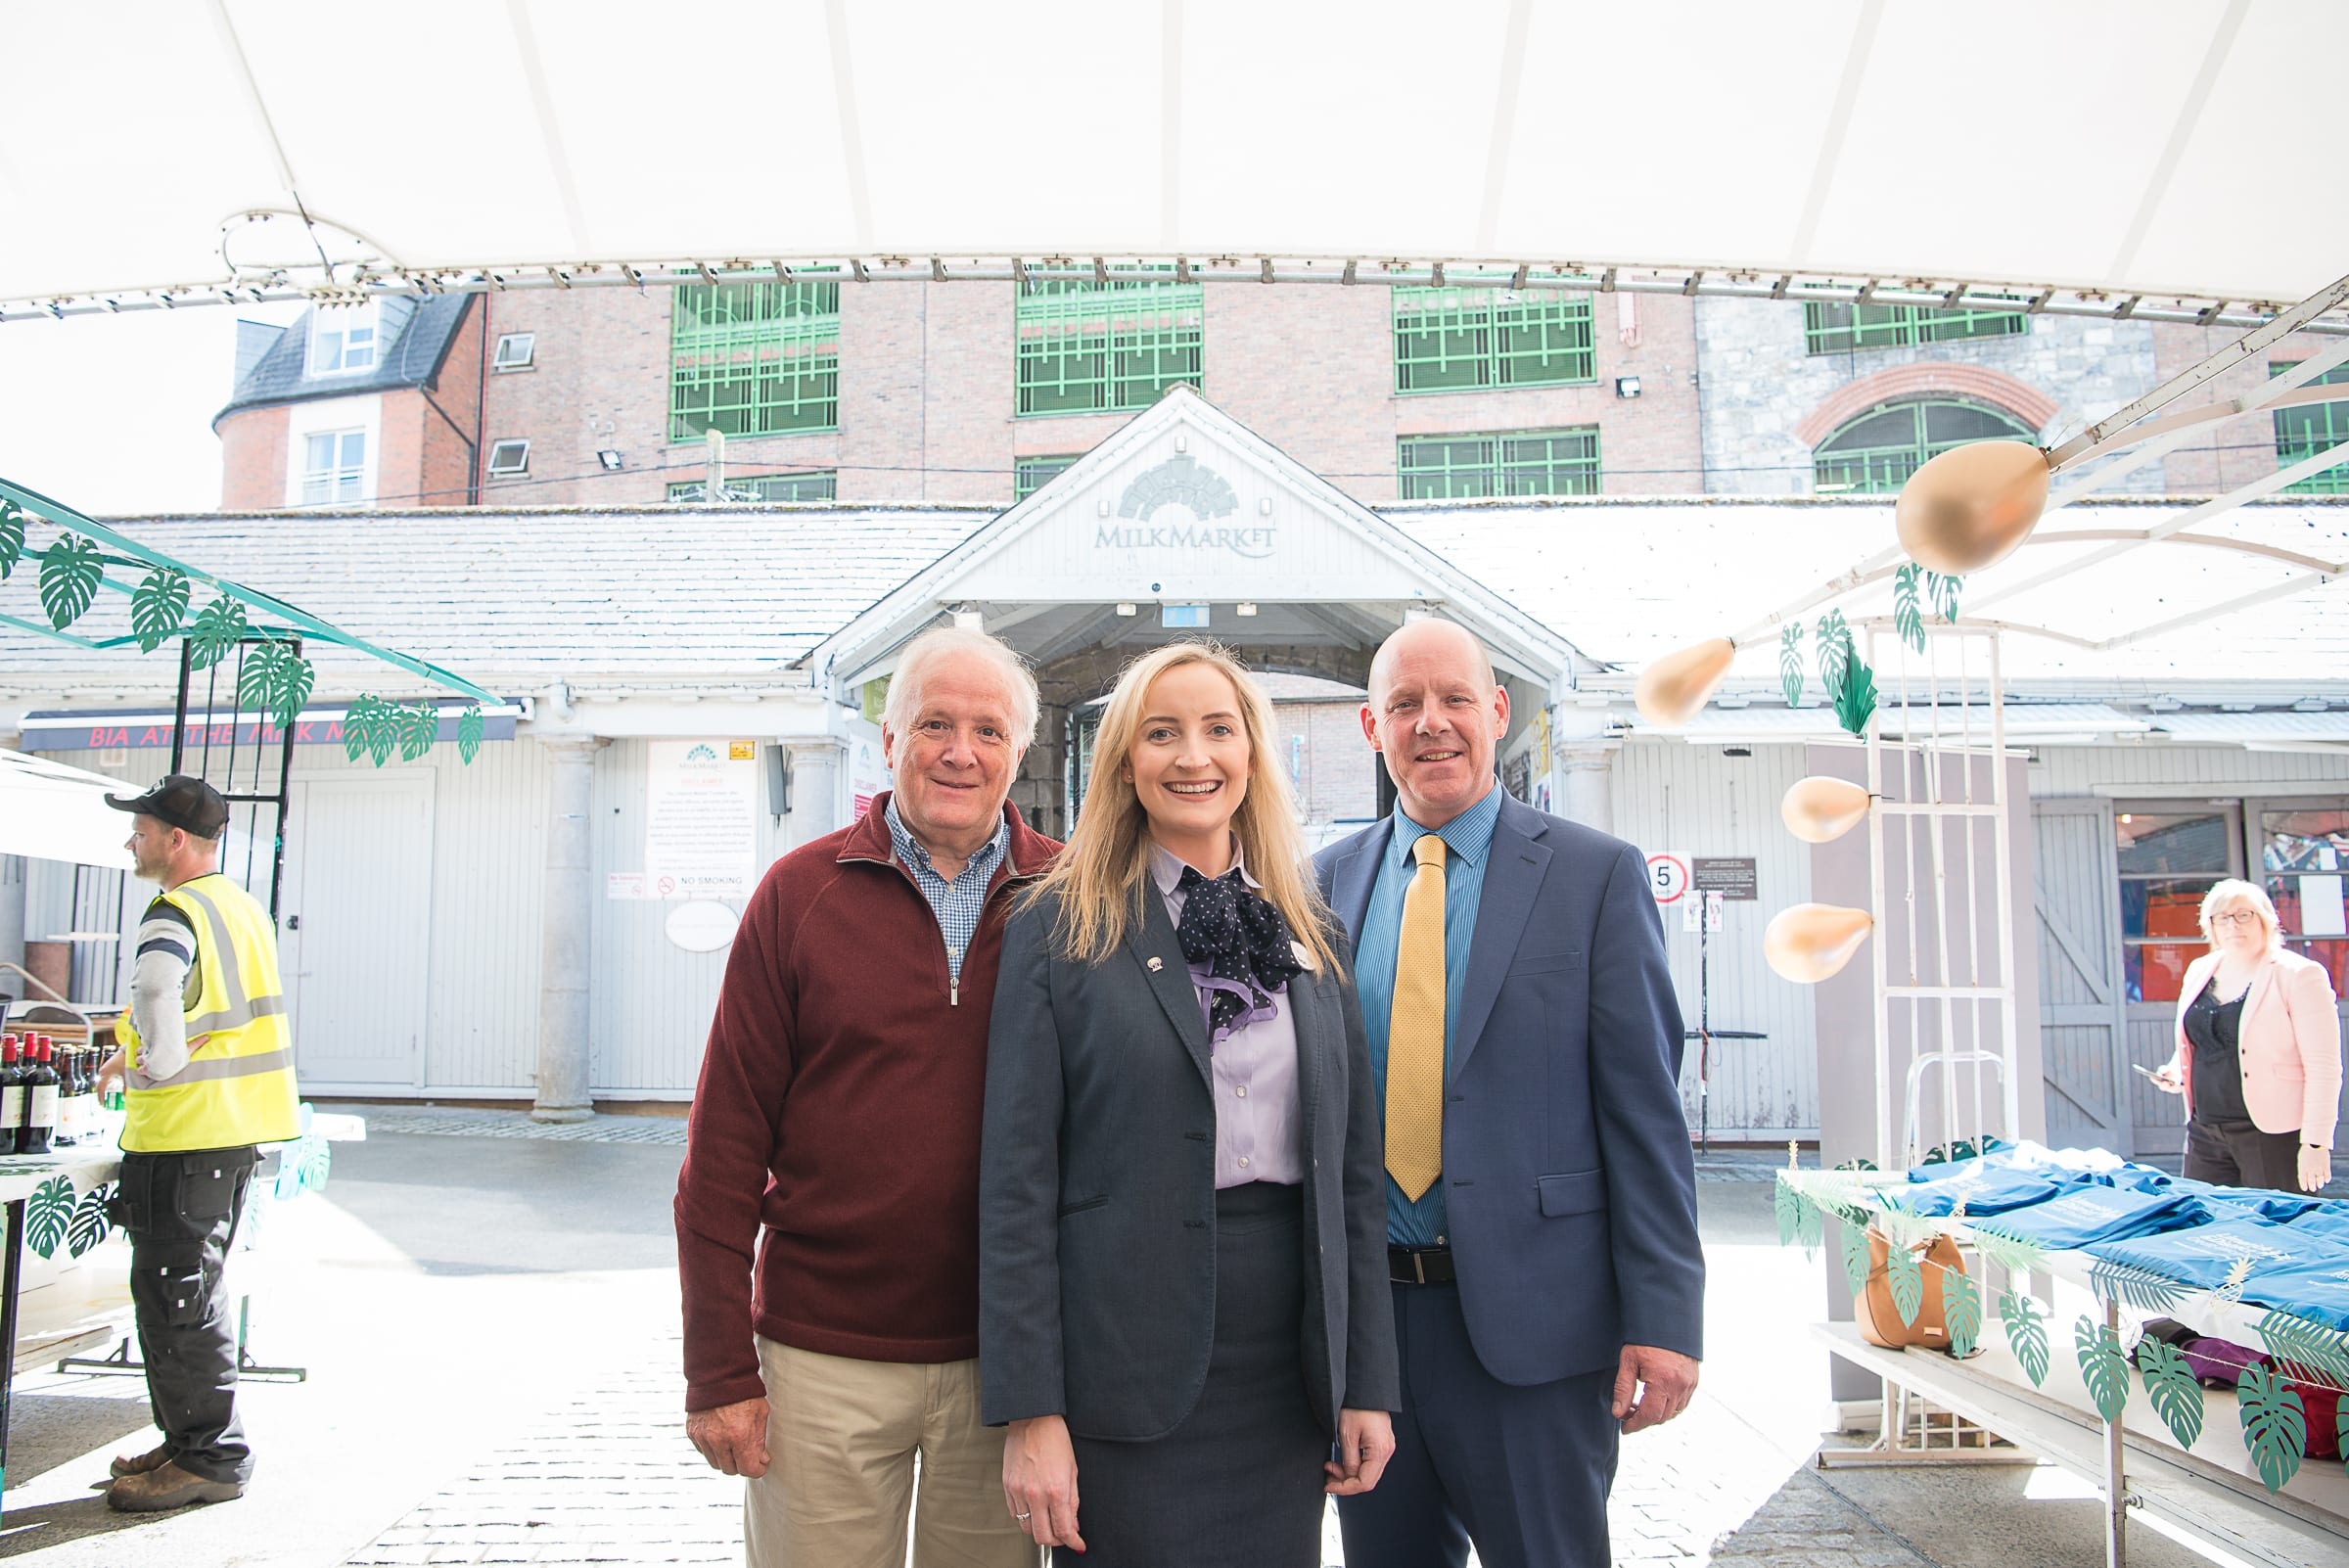 From Left to Right:  Regional Leaders BBQ which took place on the 6th June in the Limerick Milk Market:  James Stewart  - Director / Limerick and  District Credit Union,  Sarah Barry - Limerick and  District Credit Union, Mark Coleman - Clear Direction. 
Photo by Morning Star Photography